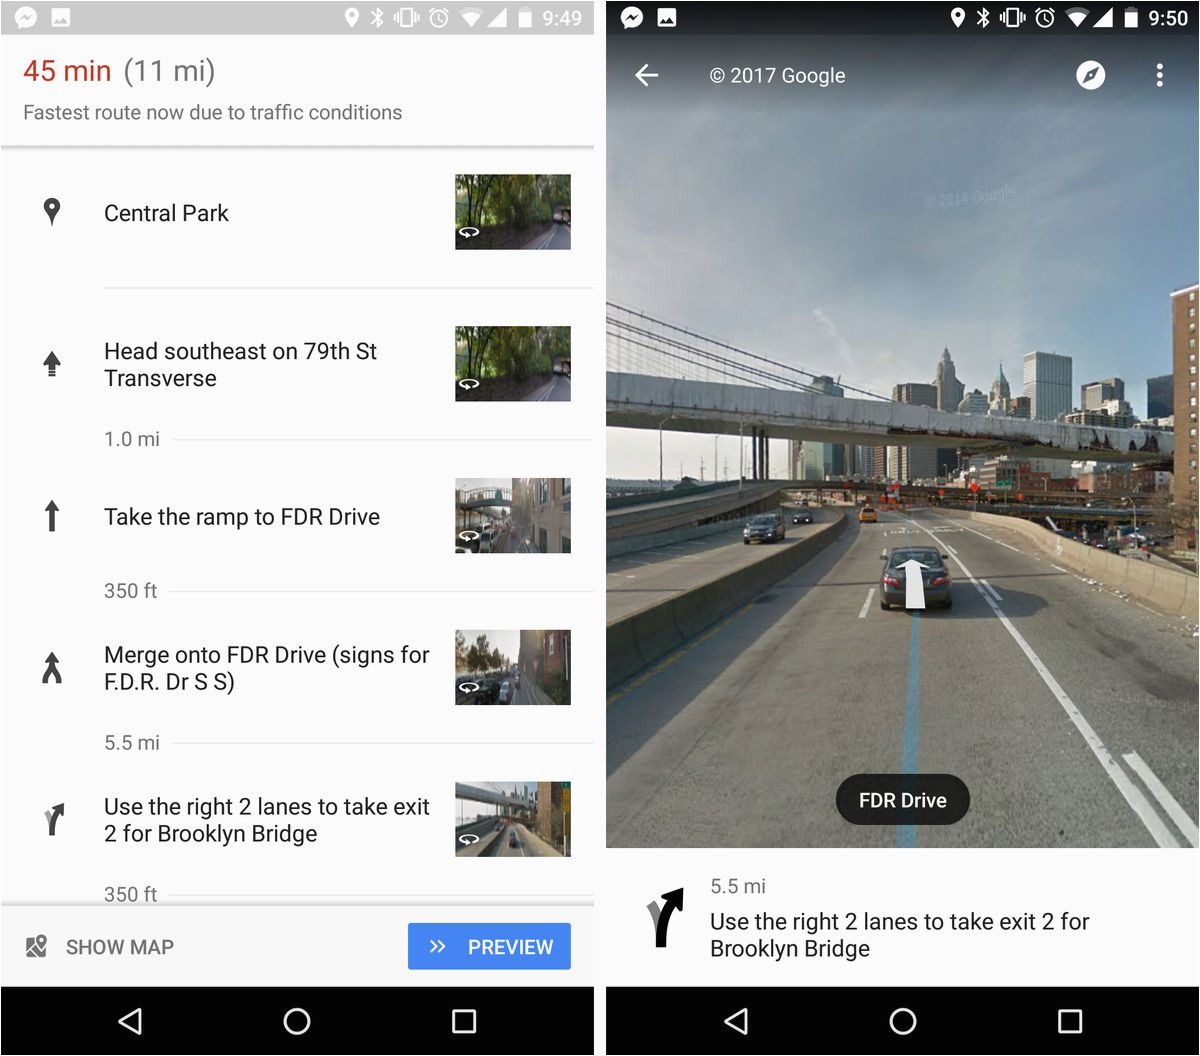 google maps now uses street view to show you exactly where to make